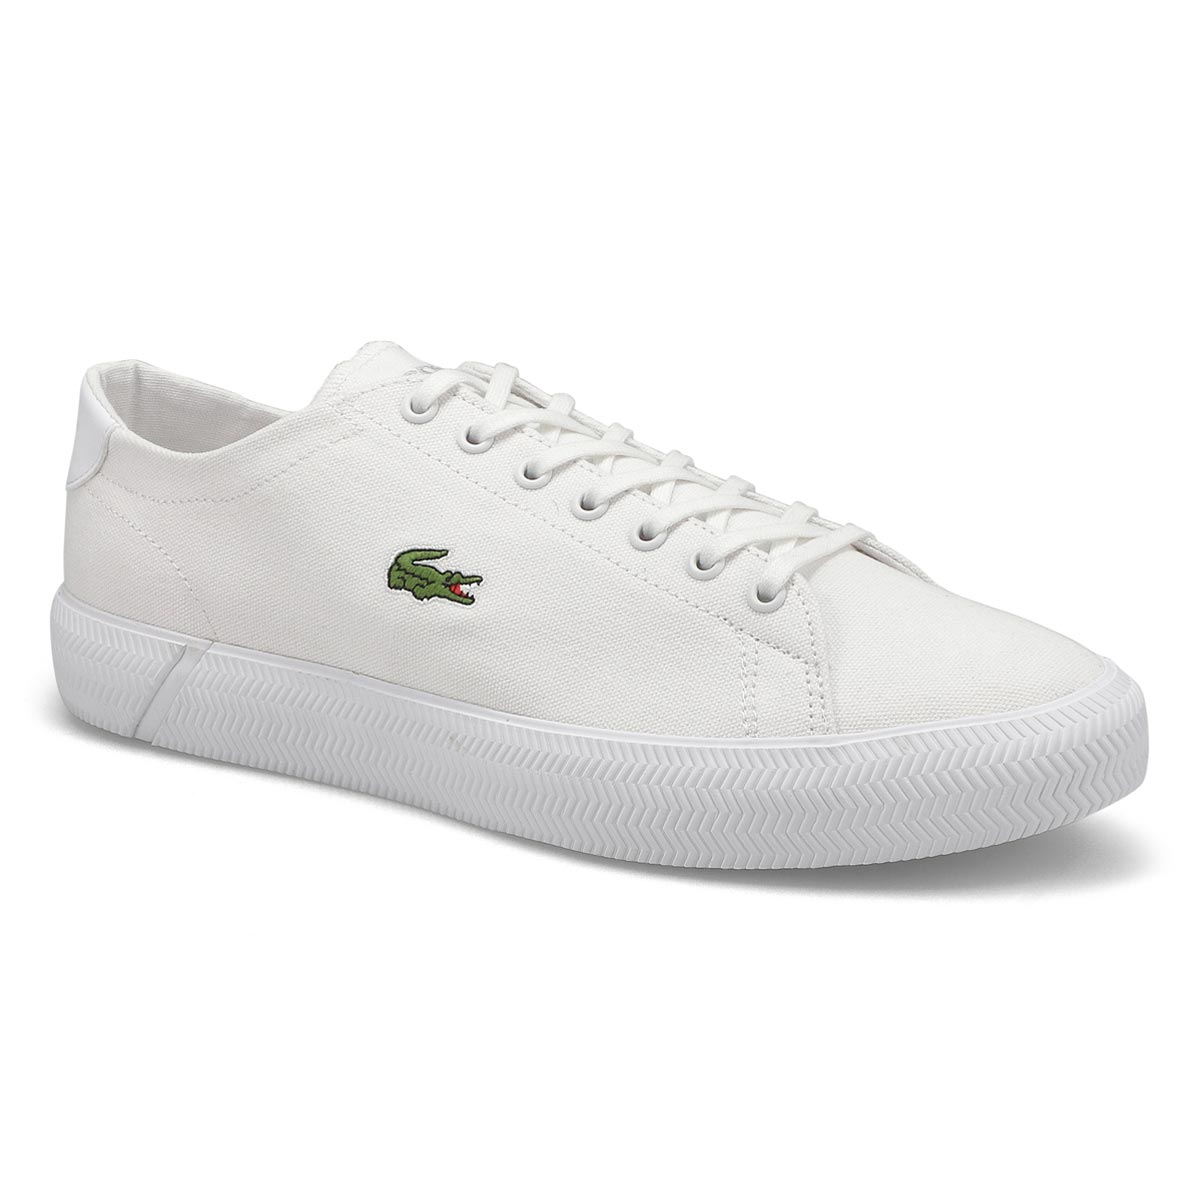 Lacoste Men's Gripshot BL Leather Sneaker - W | SoftMoc.com